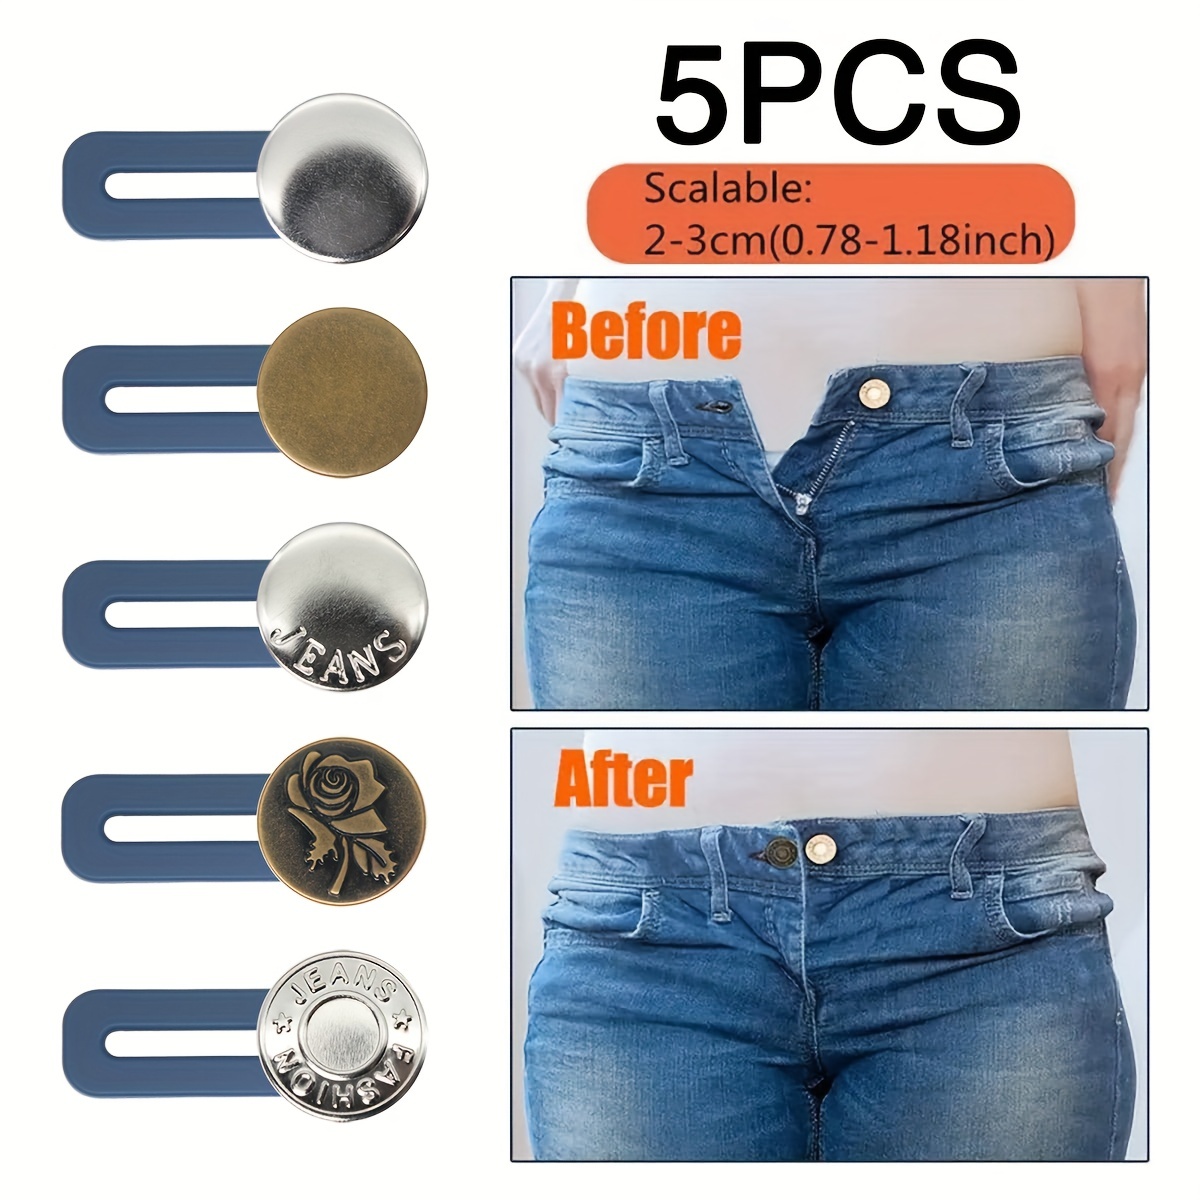 

5pcs Jeans Waist Size Change Artifact Waist Expansion Button Waist Adjustment Extension Button Pants Small To Large Invisible Without Tools